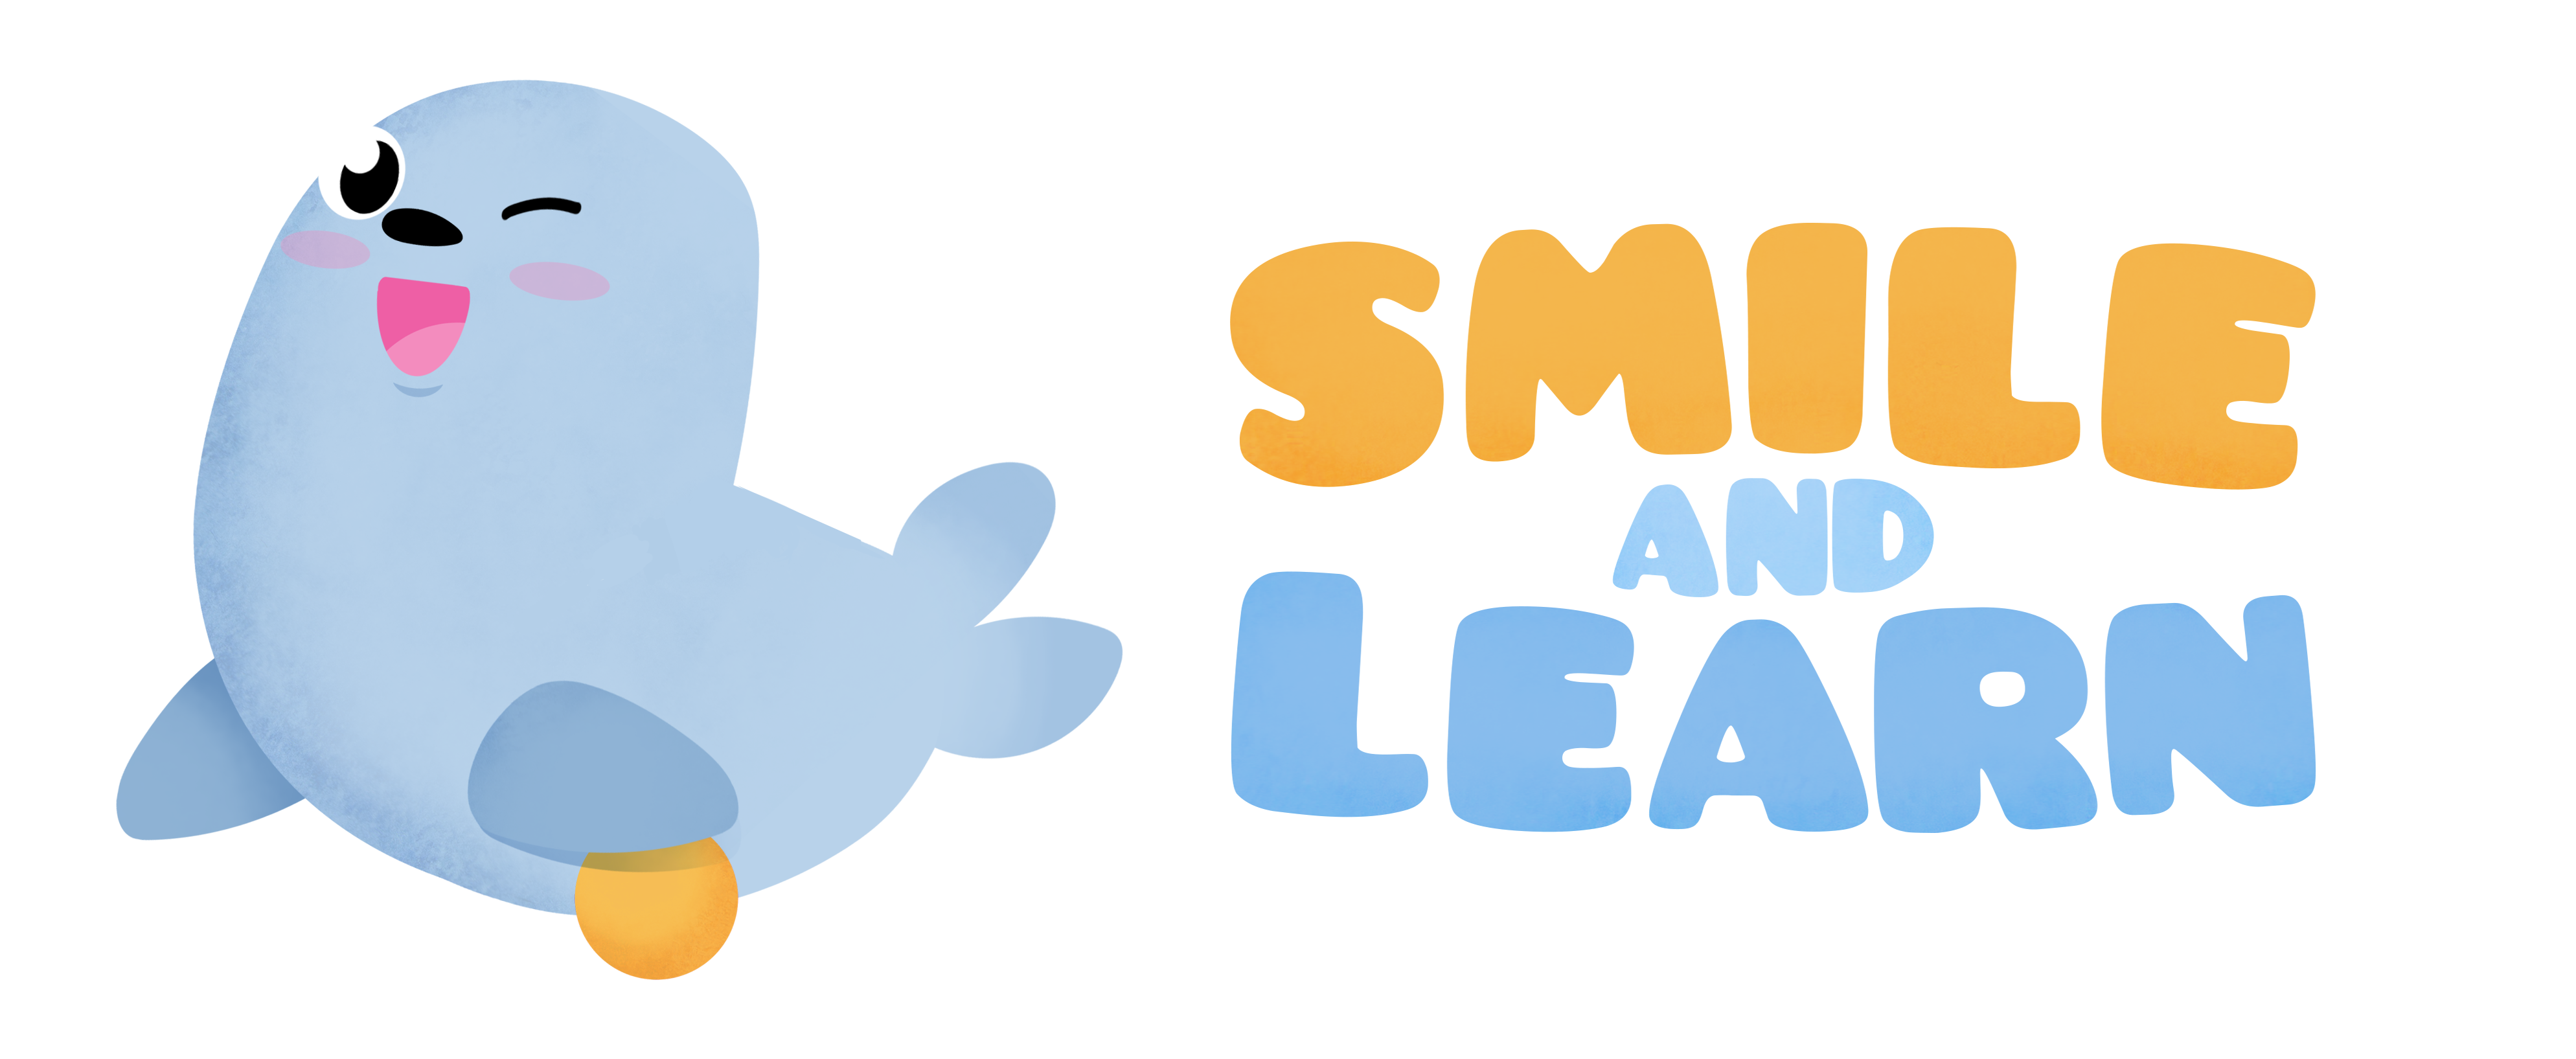 SMILE AND LEARN